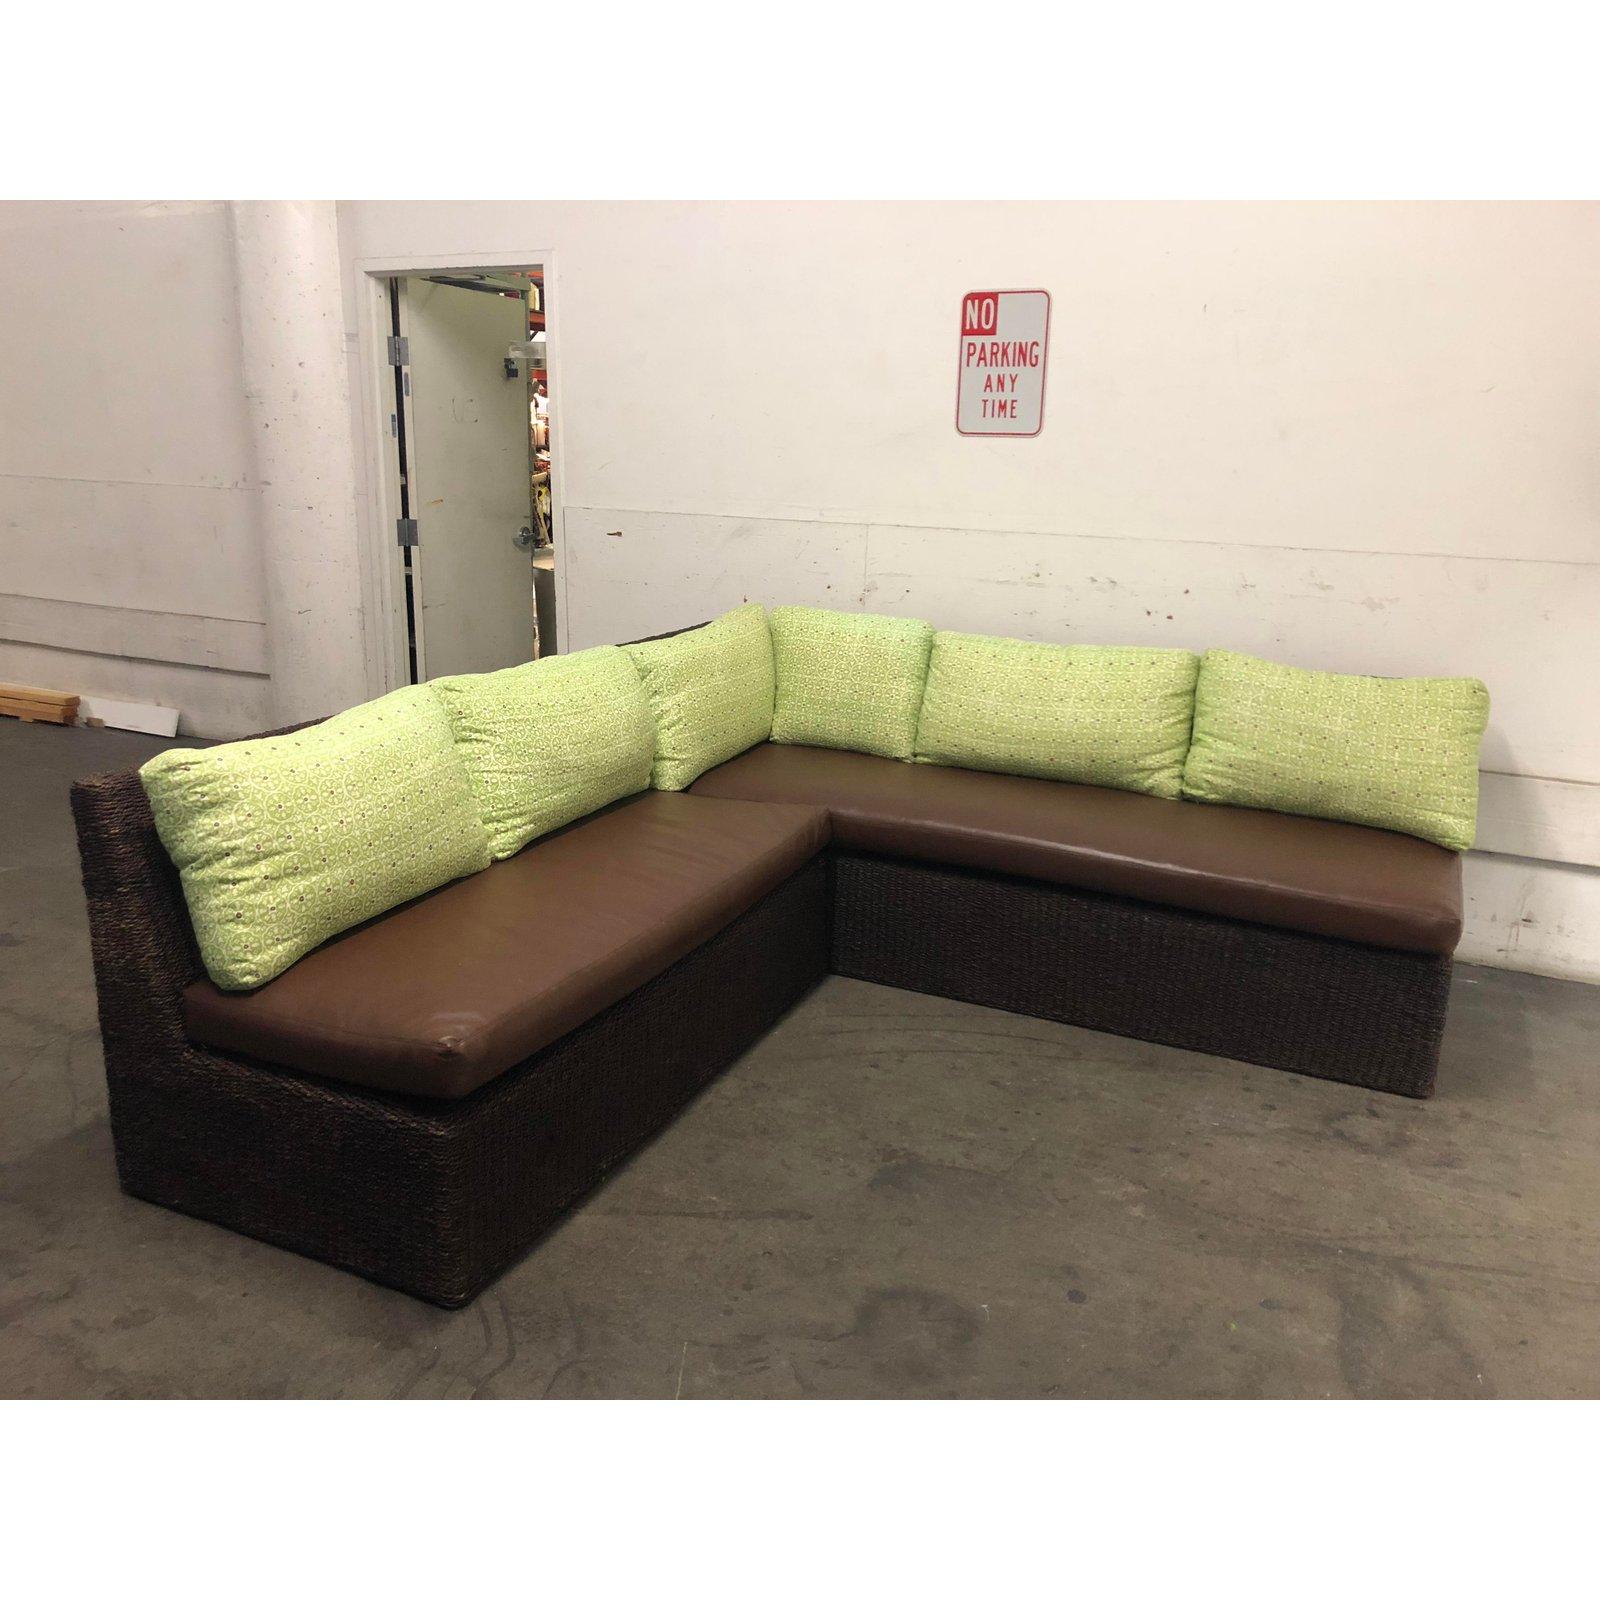 Walter's Wicker Works Two-Piece Sectional (Leder) im Angebot